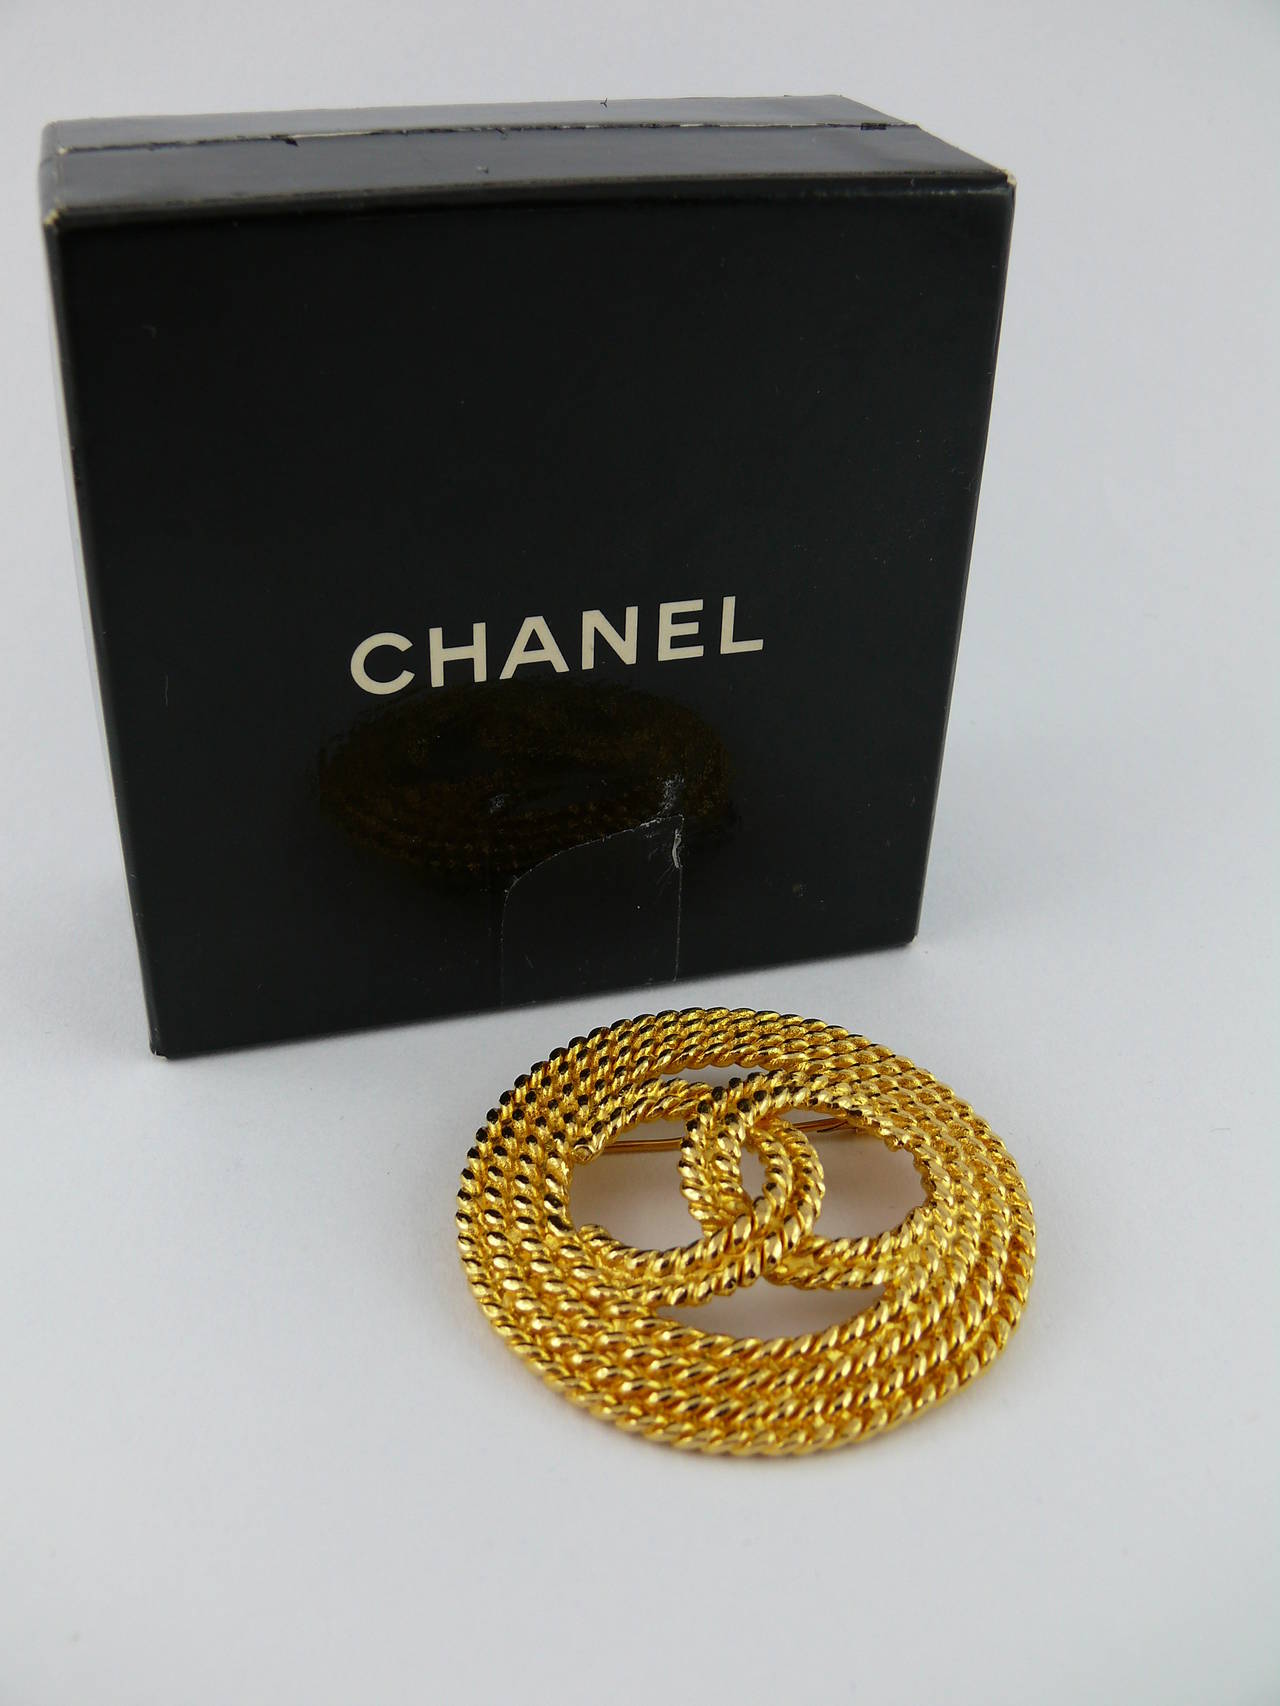 CHANEL vintage 1993 gold tone rope-like brooch featuring CC logo at the center.

Marked Chanel 2 8 Made in France.

Comes with its original box (used).

JEWELRY CONDITION CHART
- New or never worn : item is in pristine condition with no noticeable